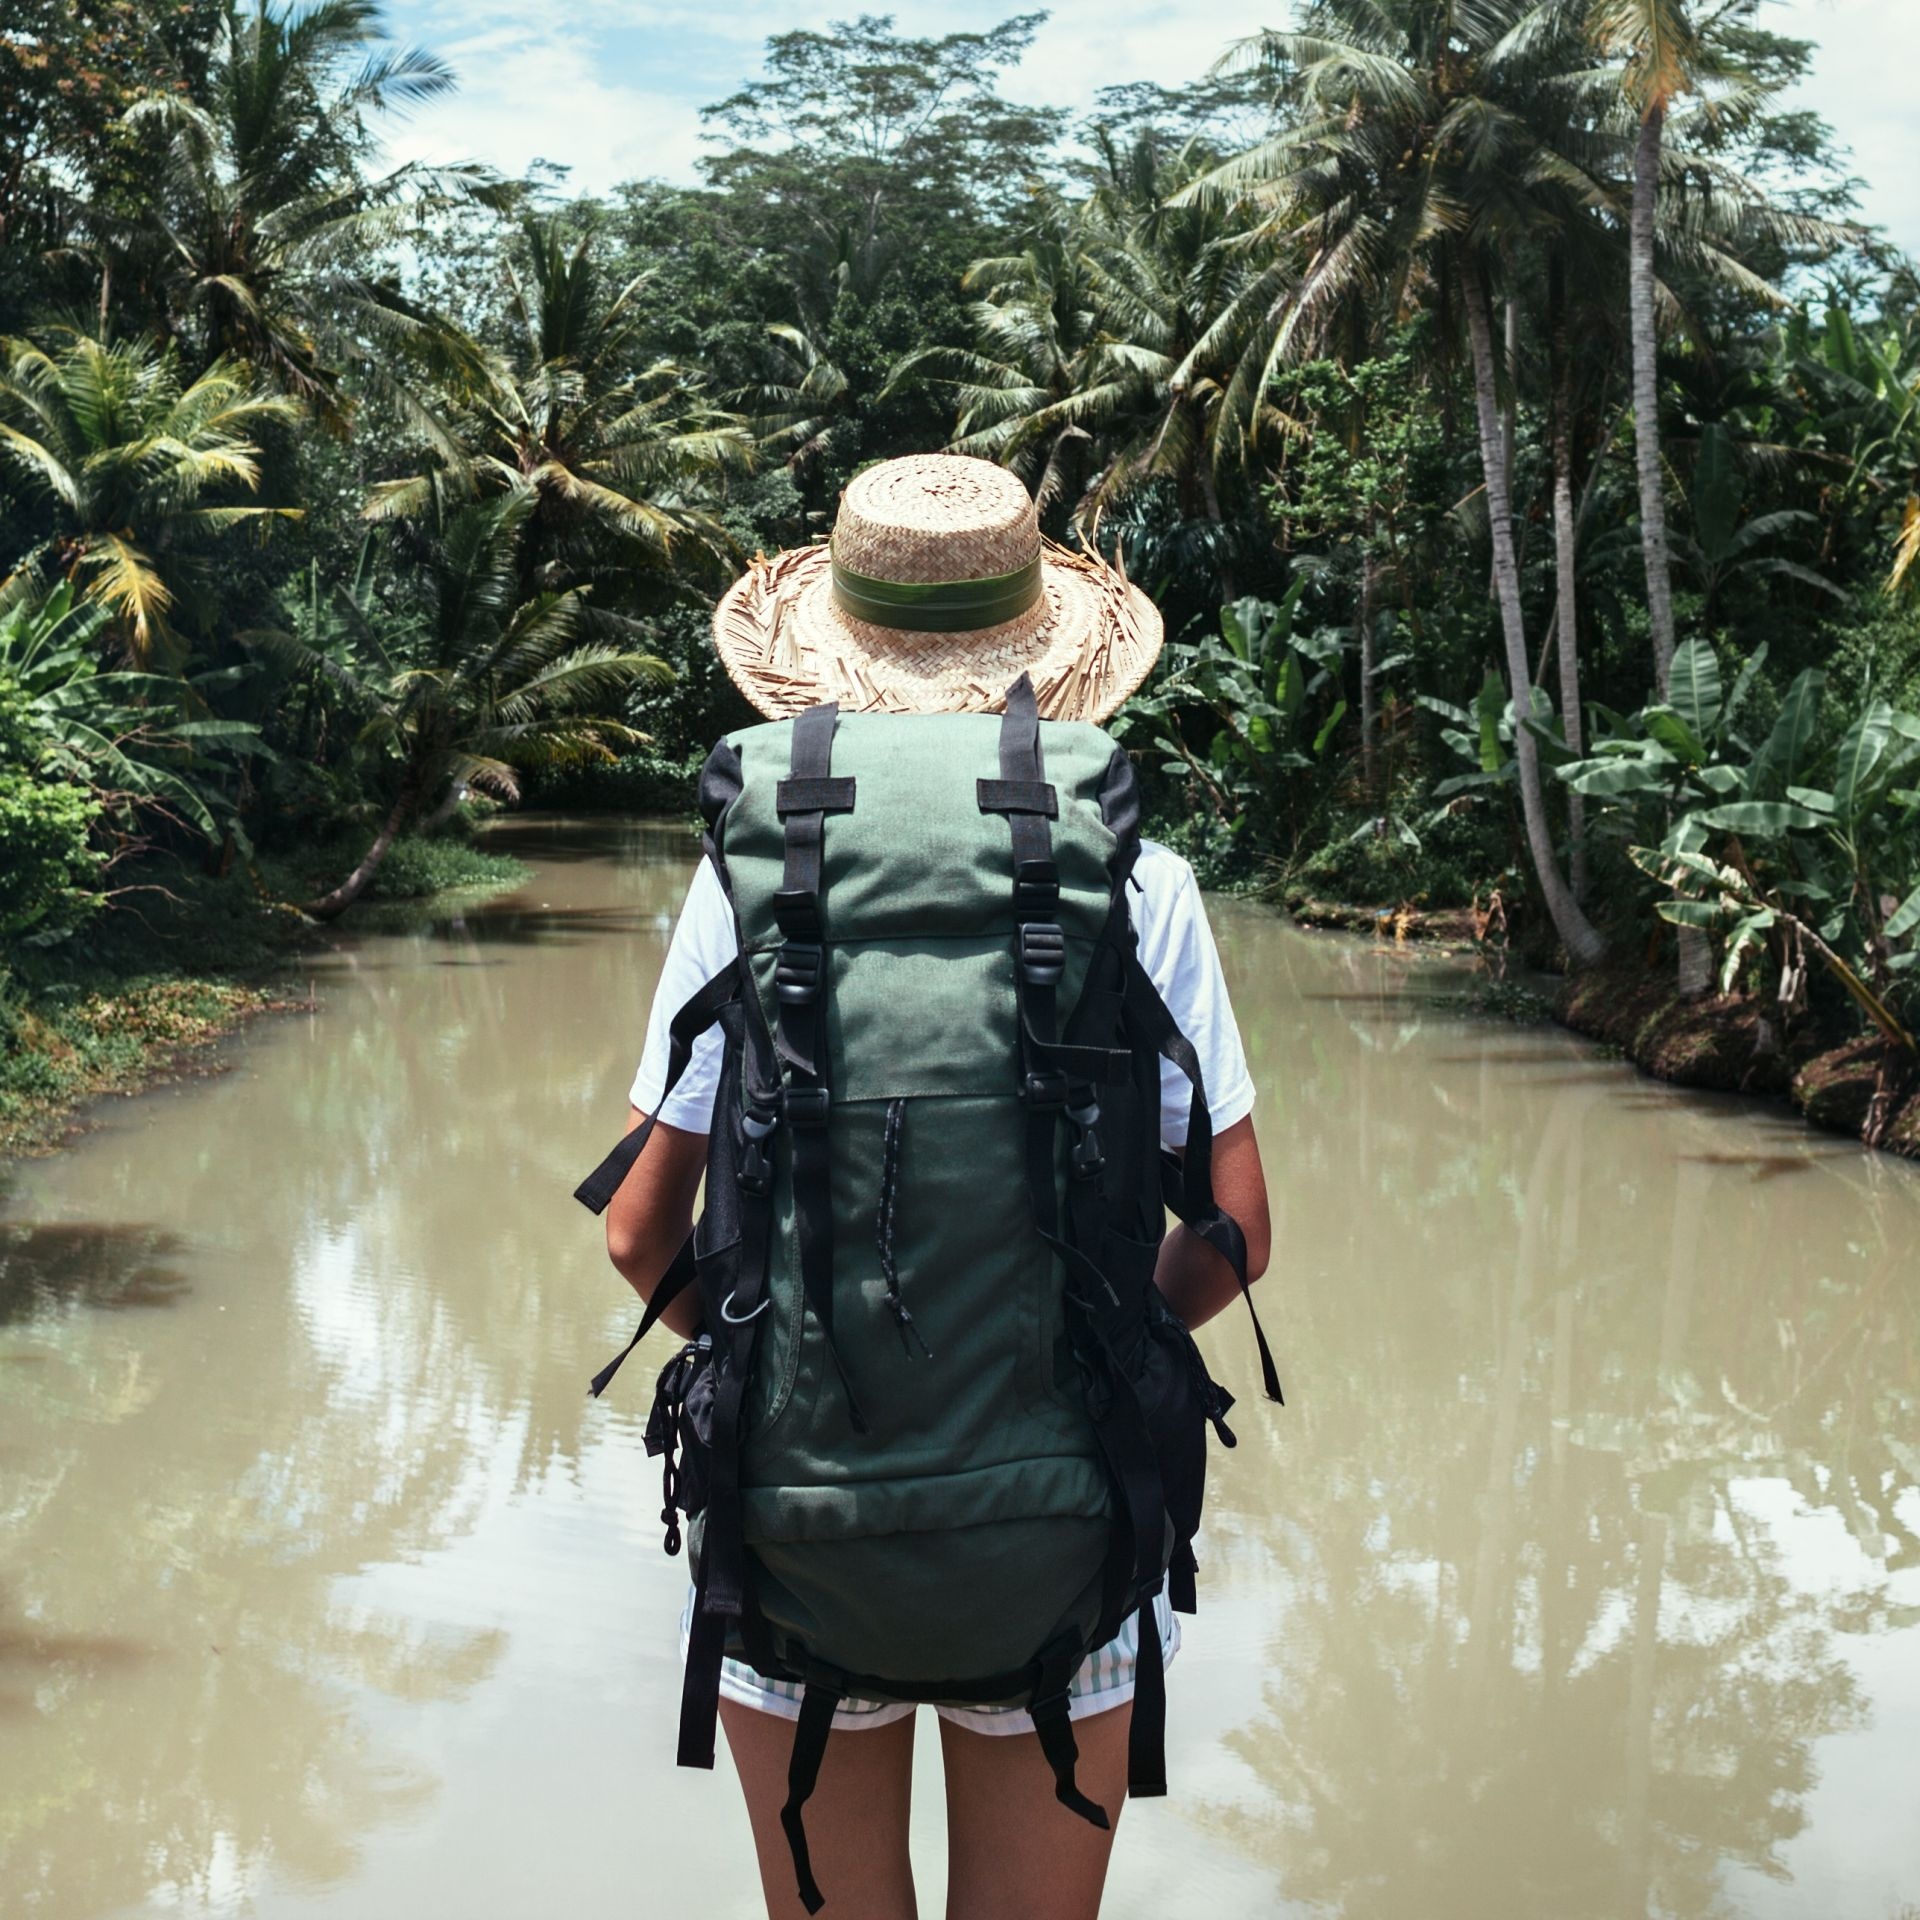 Backpacking: A journey to a tropical forest, An extreme sports activity. 1920x1920 HD Wallpaper.